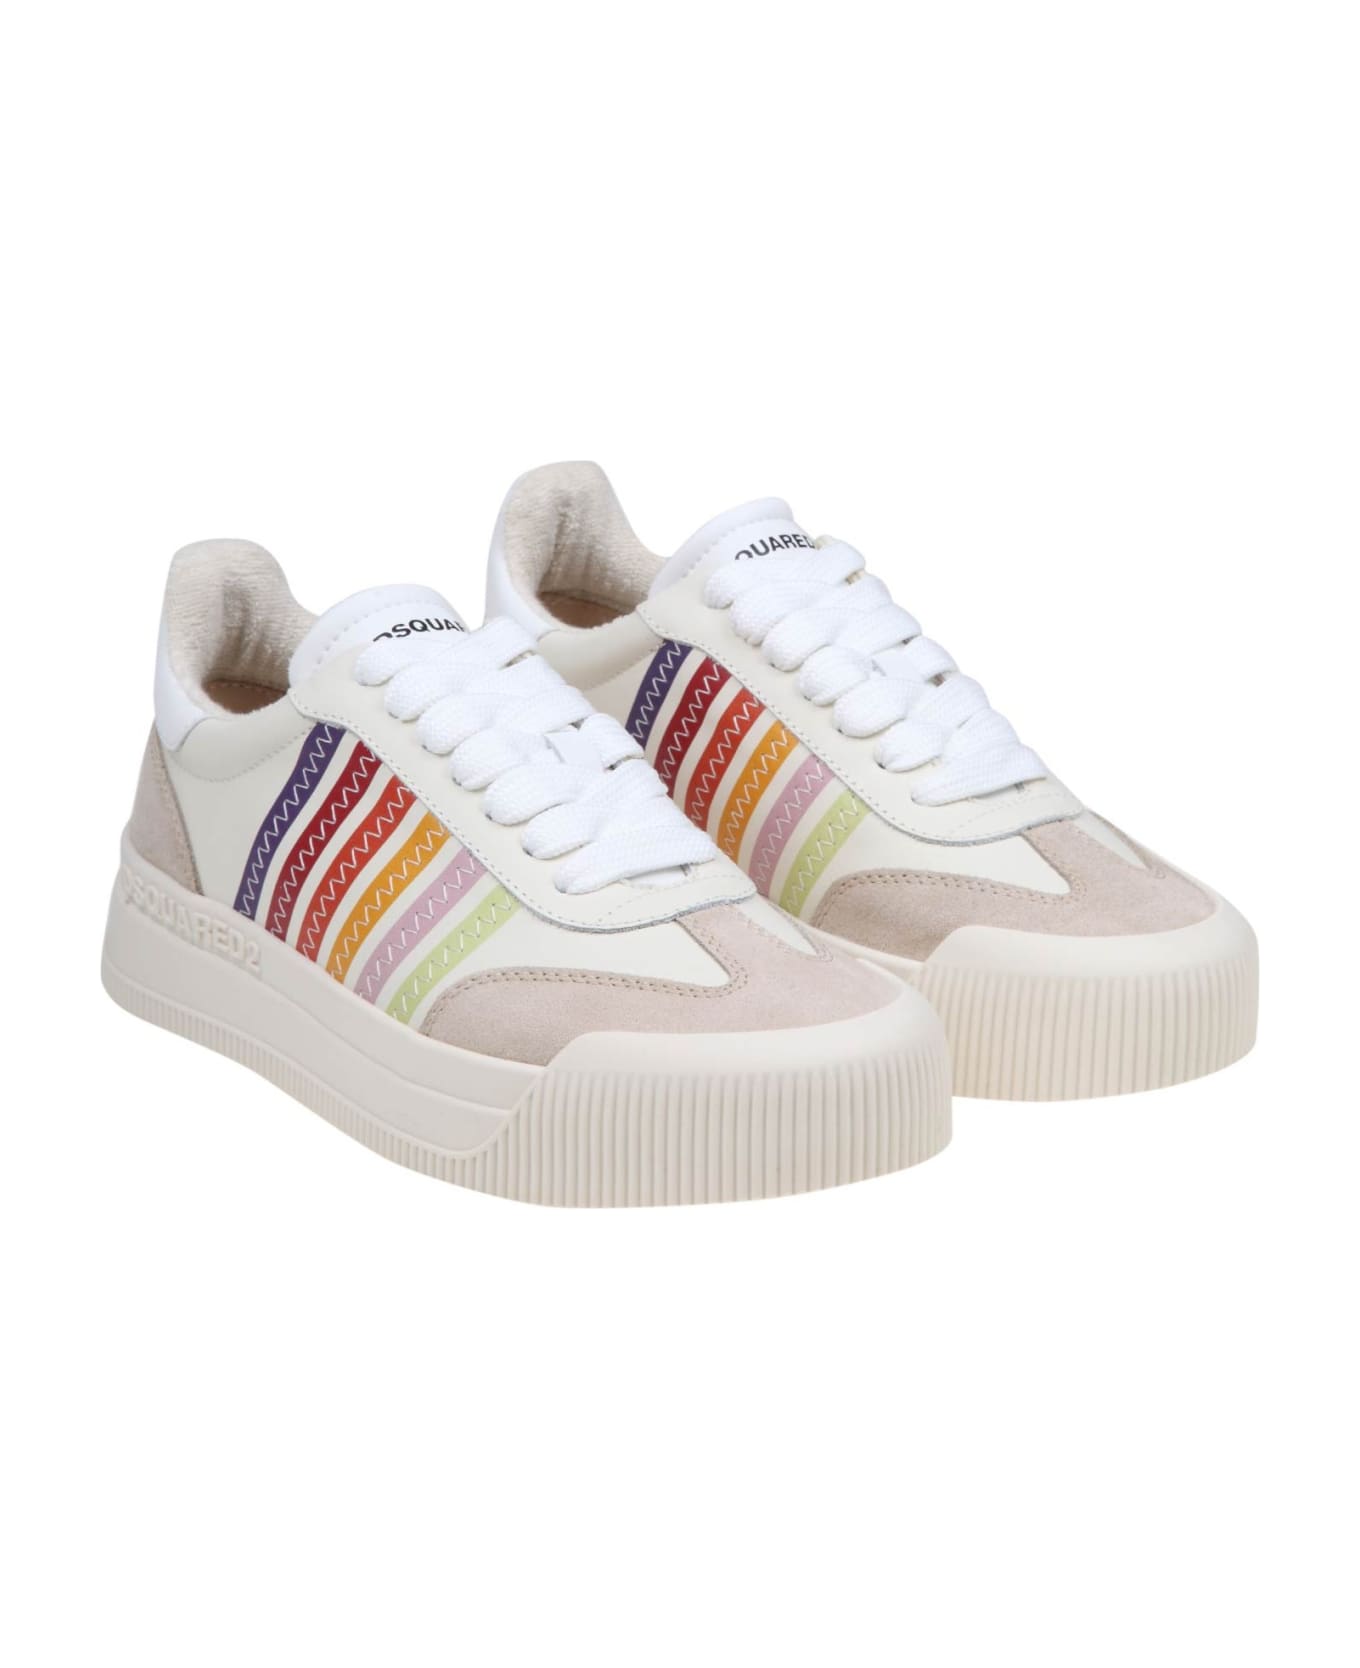 Dsquared2 New Jersey Sneakers - white/multicolor スニーカー